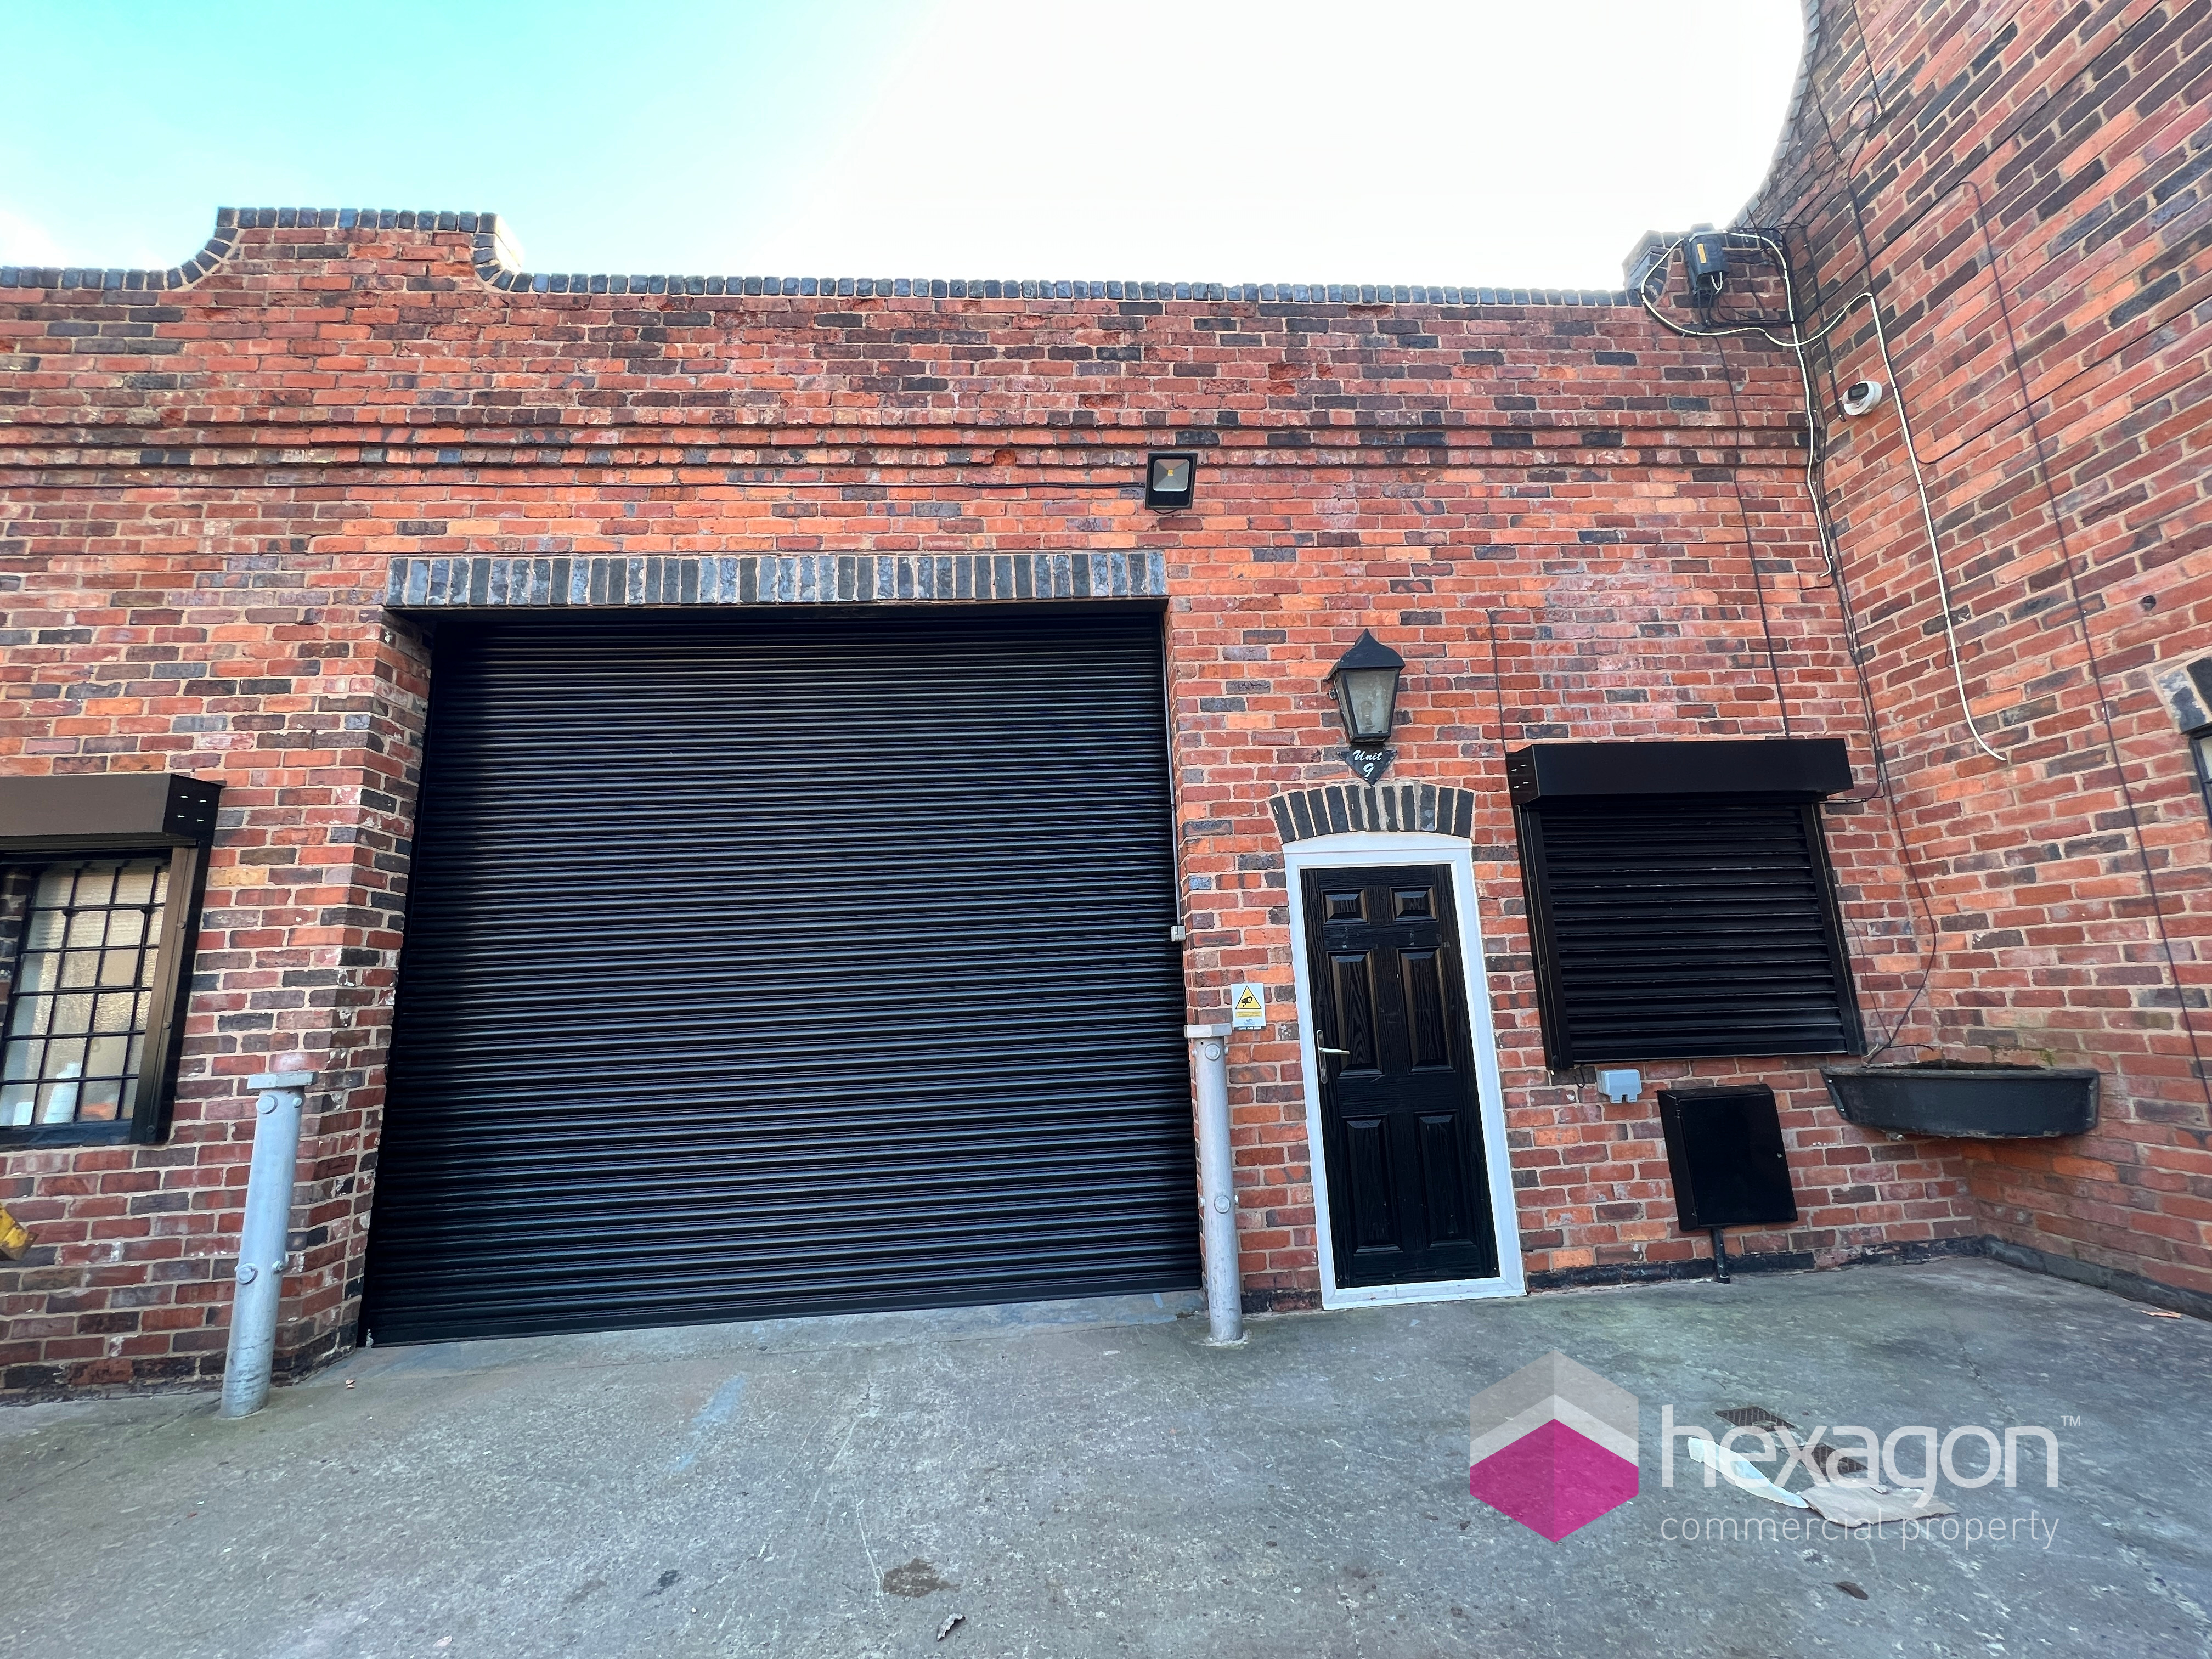 Light Industrial for rent in Cradley Heath. From Hexagon Commercial Property